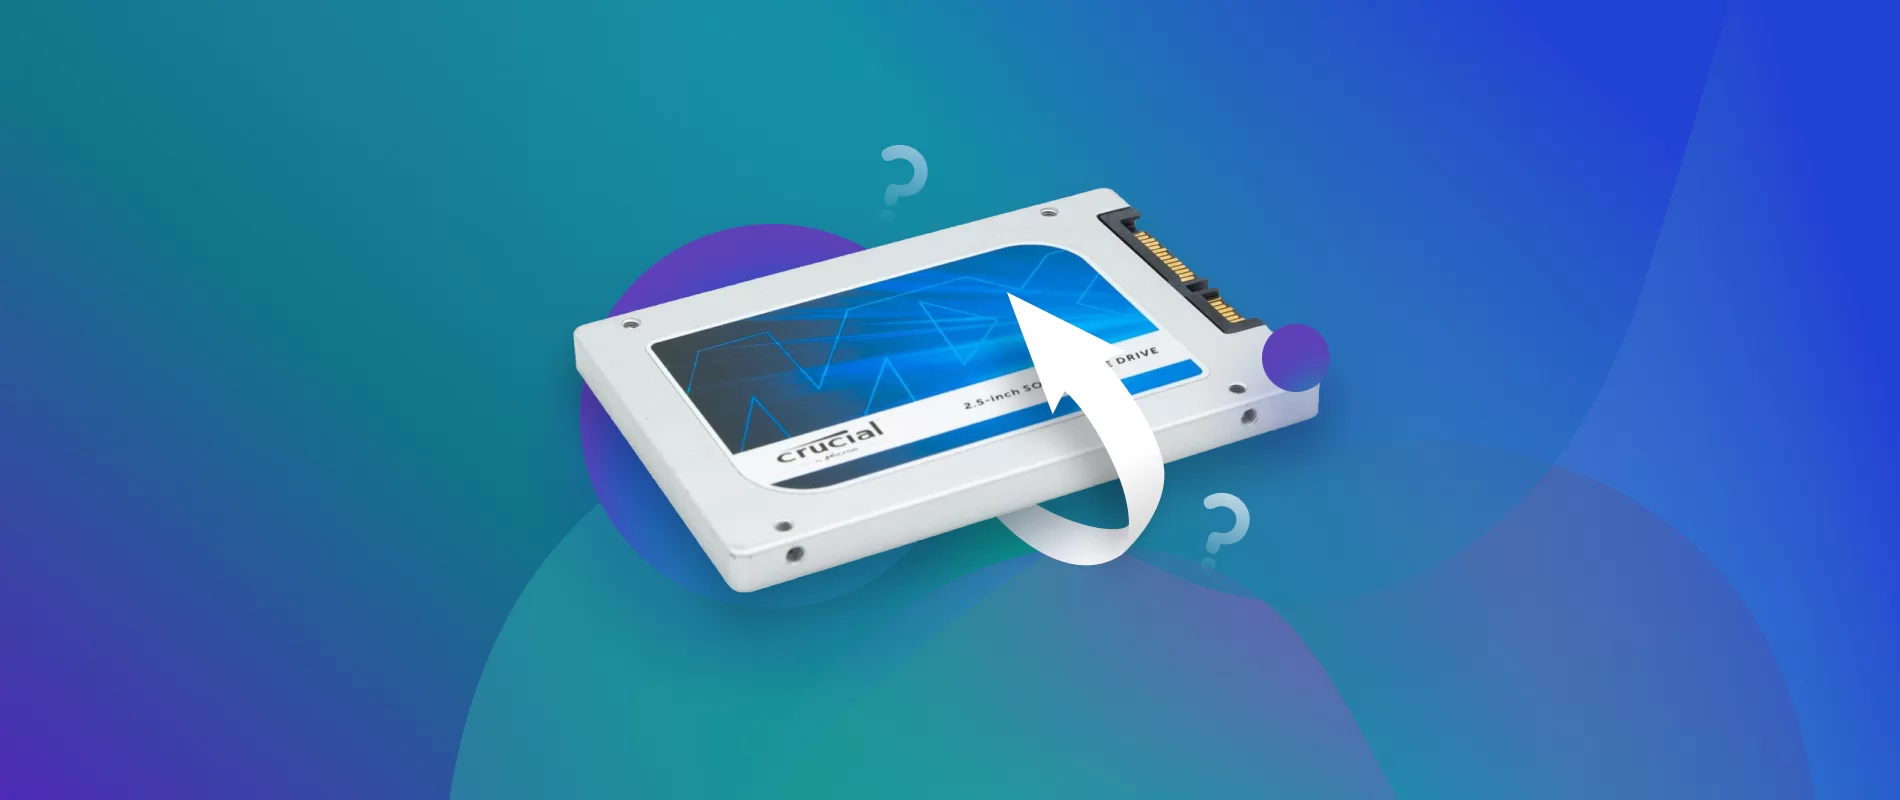 How to Install & Format your 2.5 SATA SSD